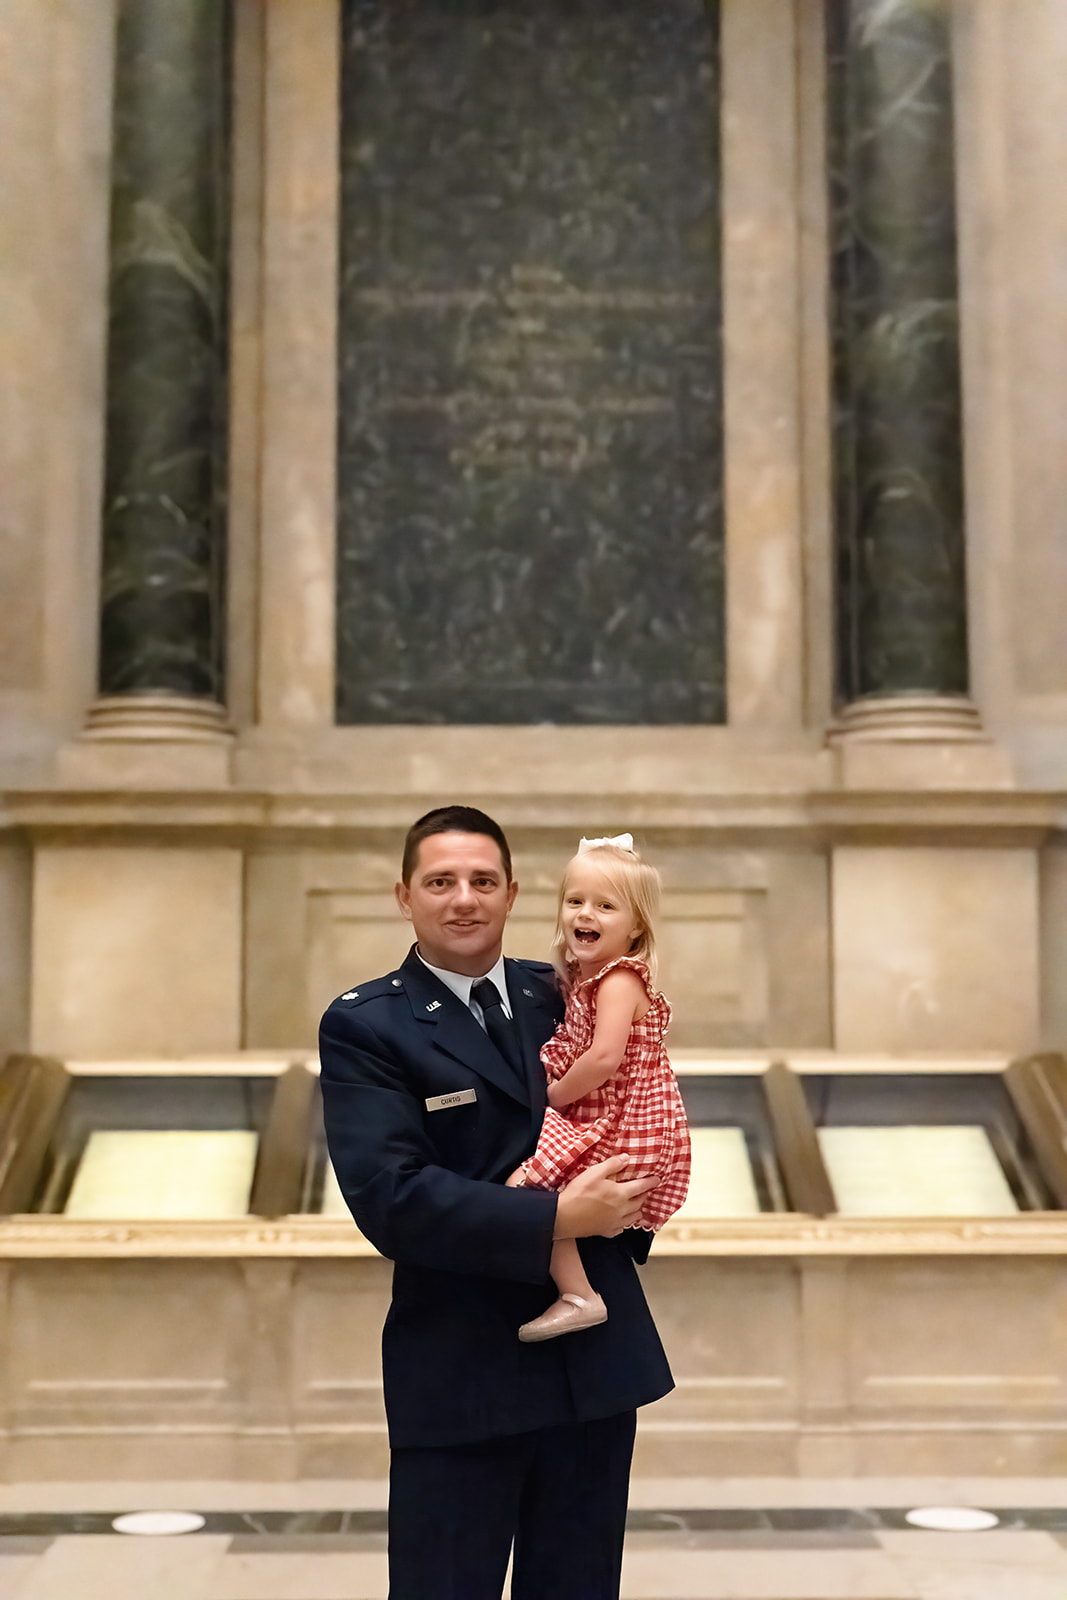 Air force promotion ceremony